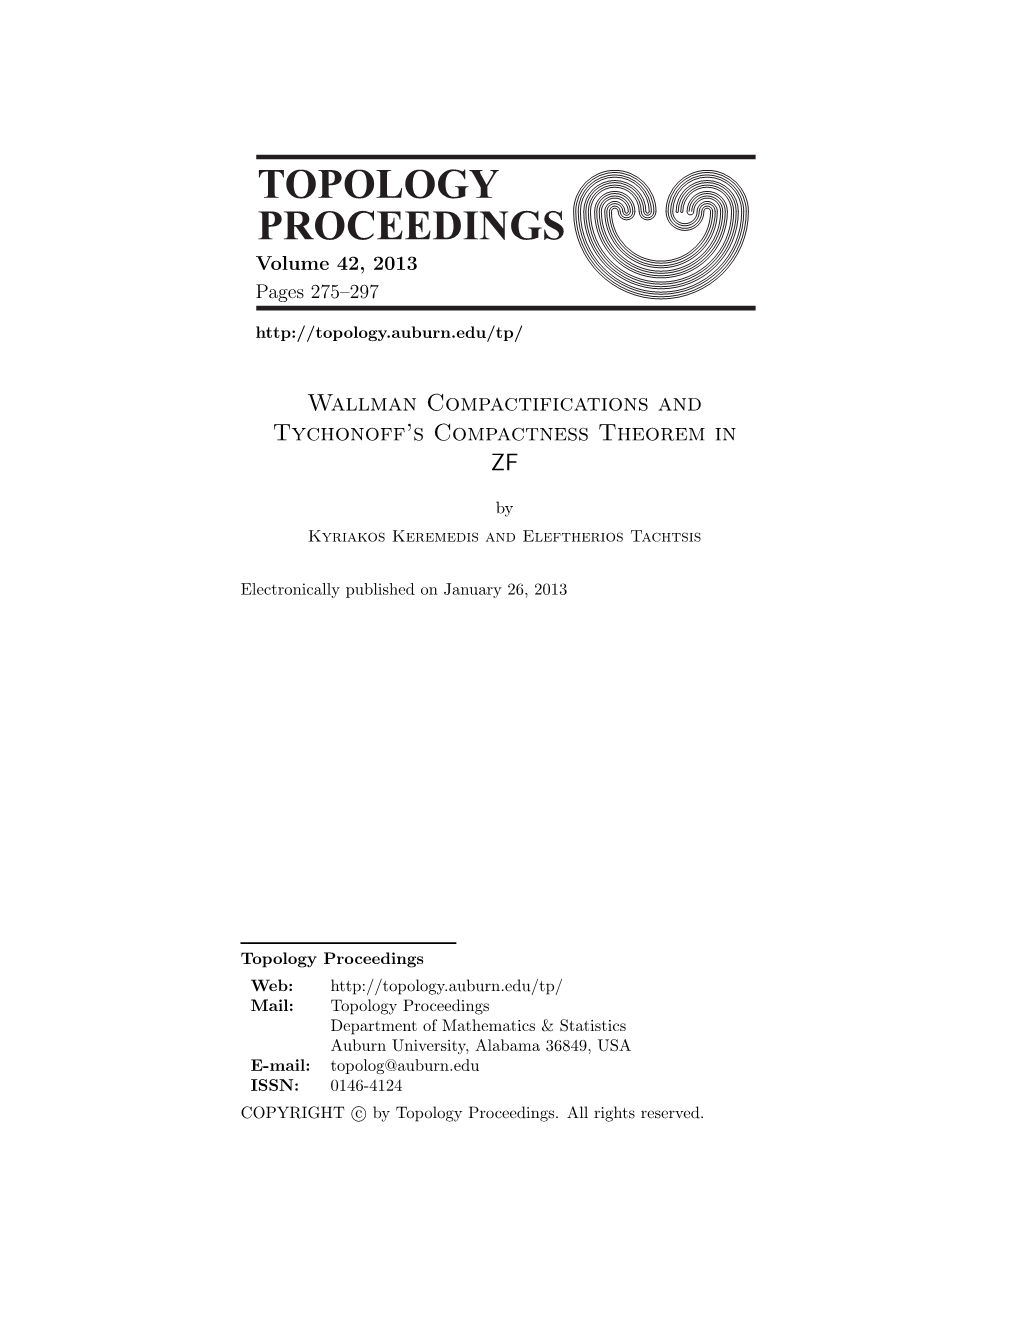 Topology Proceedings 42 (2013) Pp. 275-297: Wallman Compactifications and Tychonoff's Compactness Theorem in {\Sf